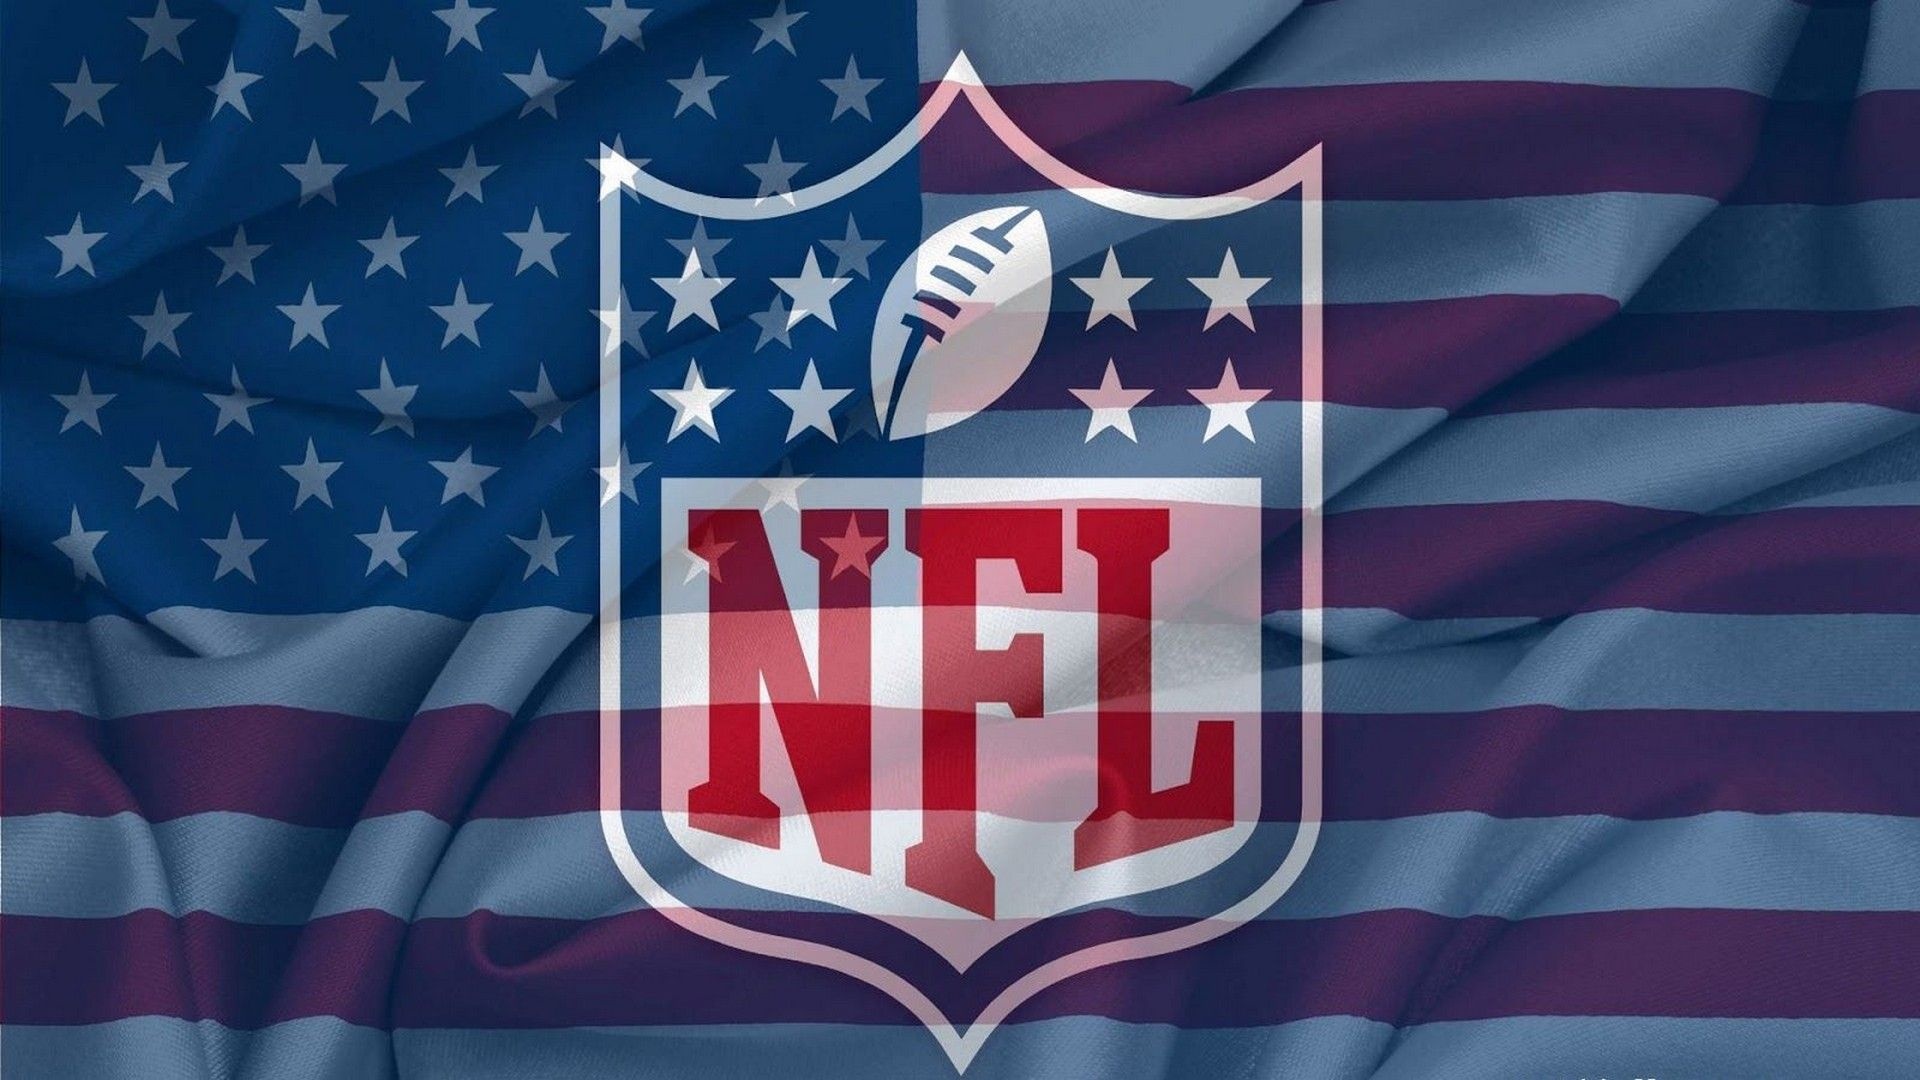 NFL, American football league, Powerhouse teams, Exciting competition, 1920x1080 Full HD Desktop